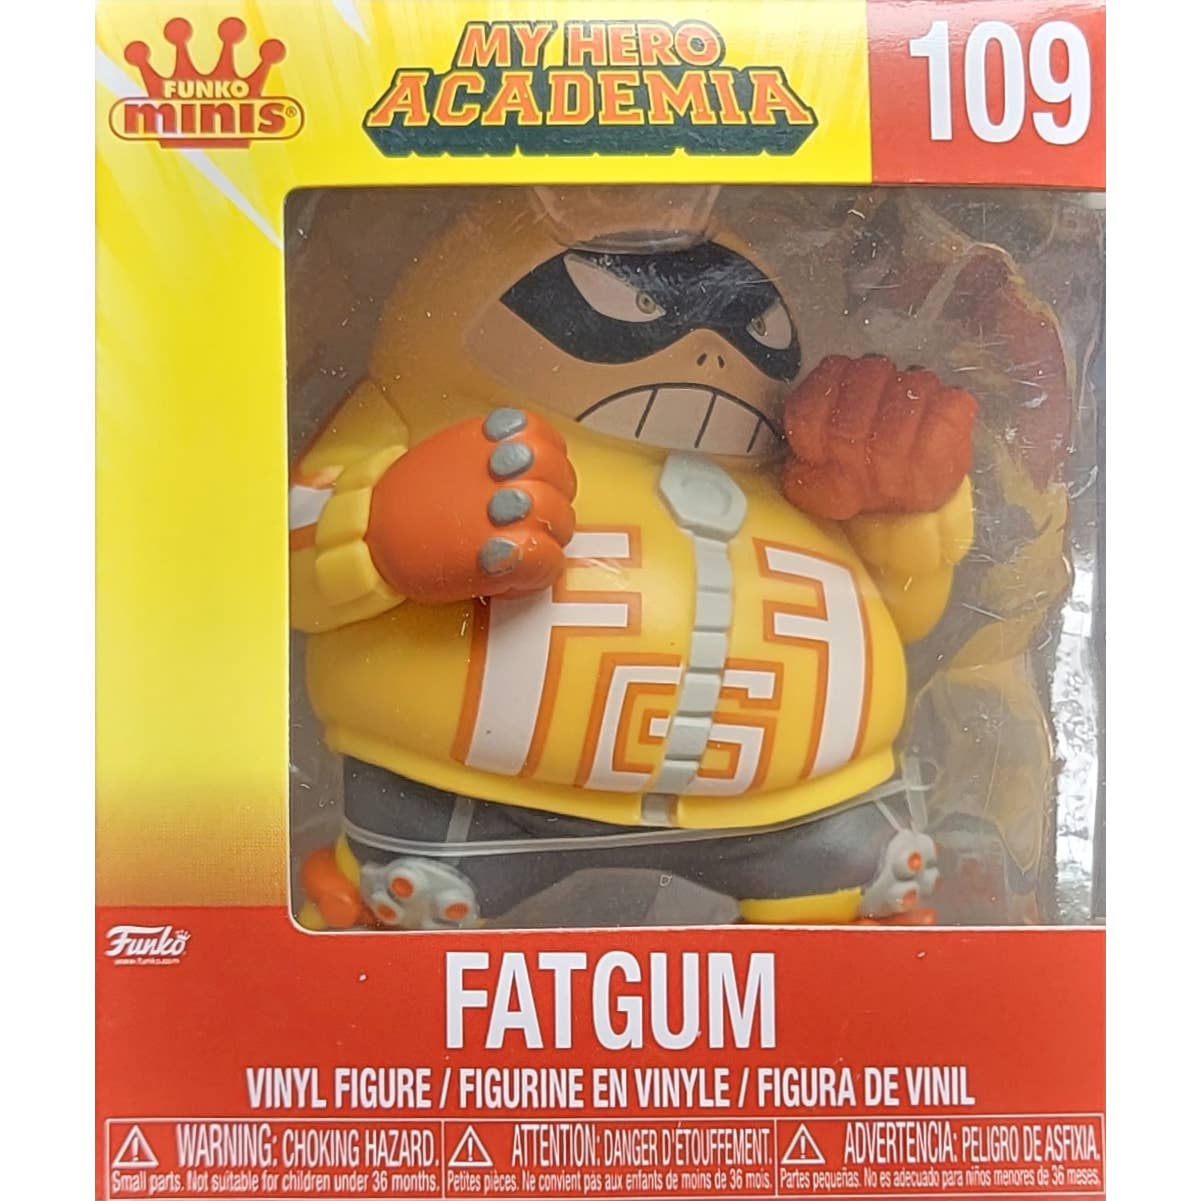 Fatgum - Funko Minis! - Awesome Deals Deluxe